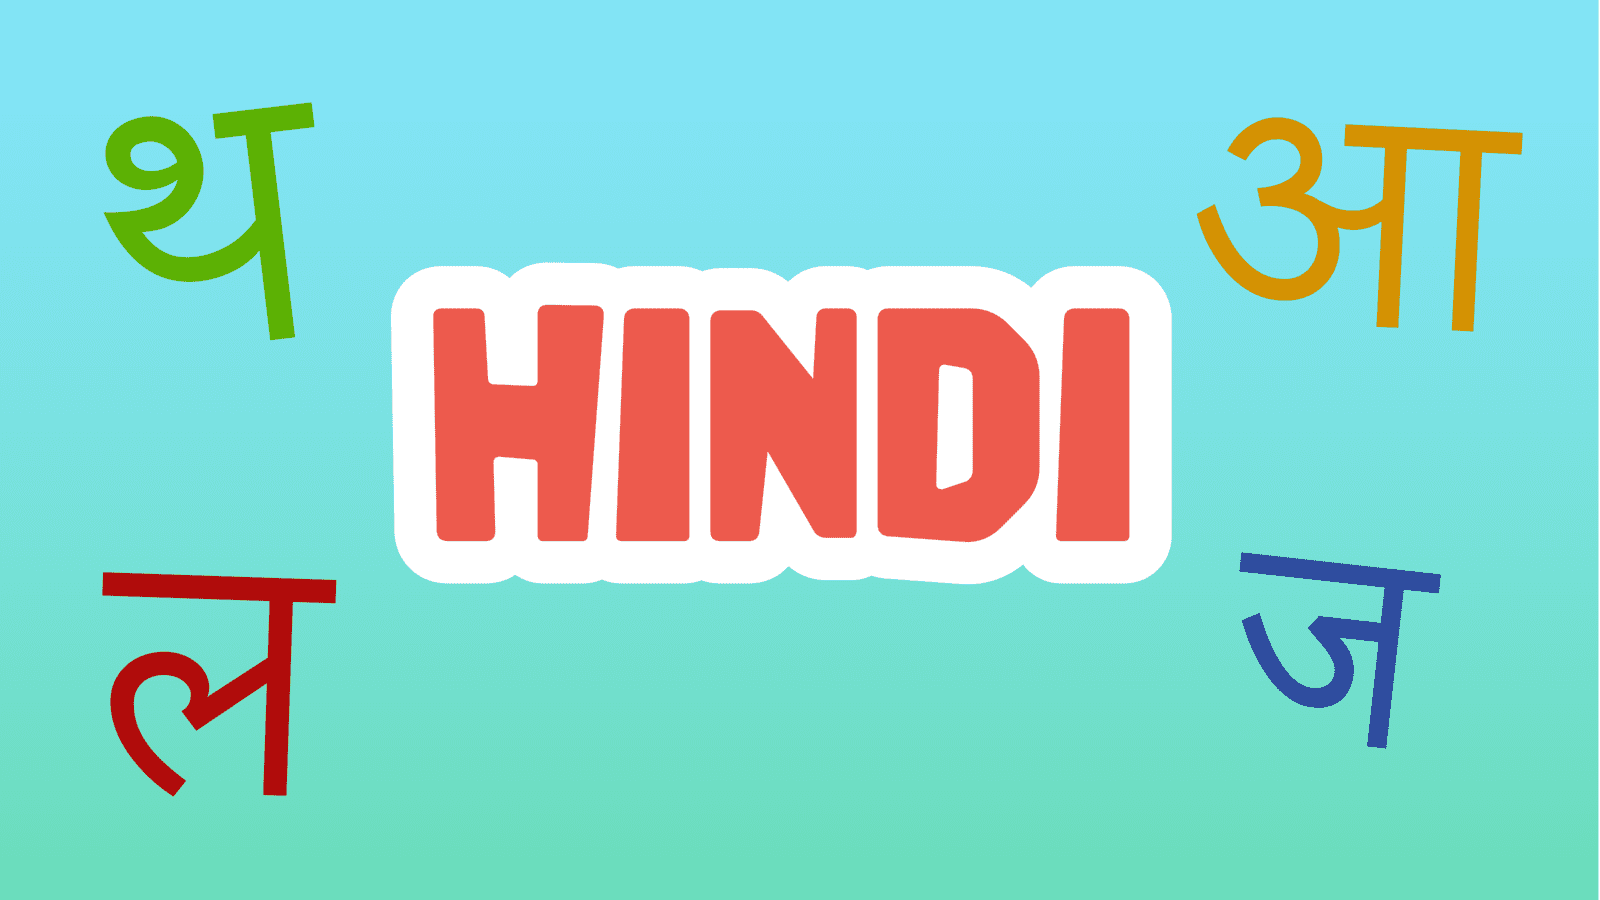 Hindi Alphabets Facts for Kids – 5 Fascinating Facts about Hindi Alphabets